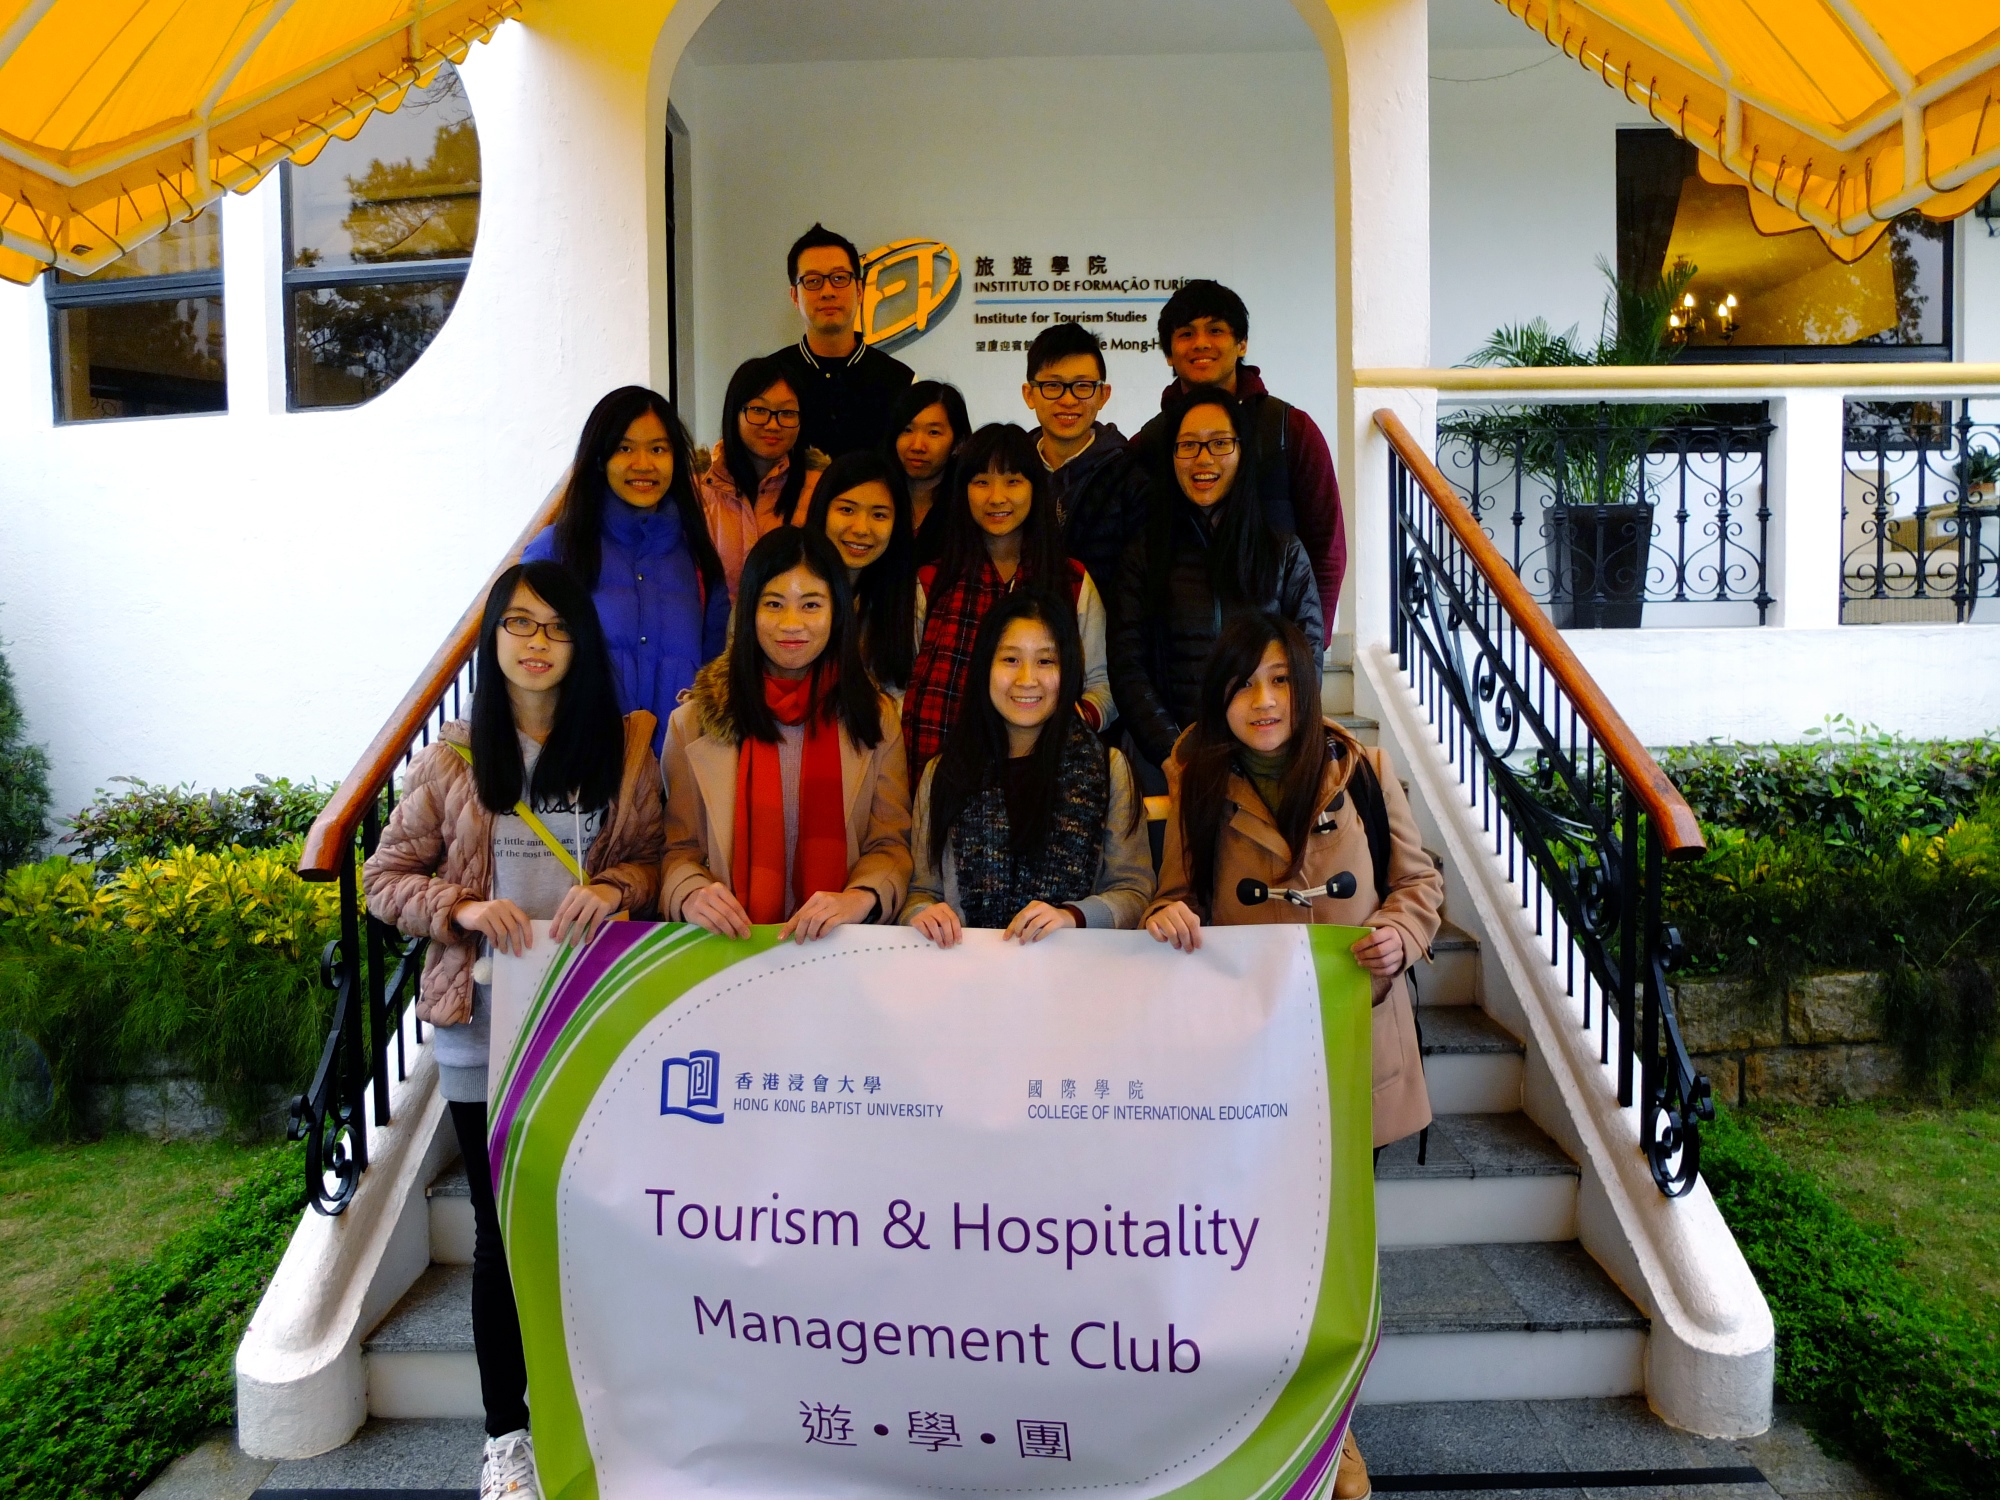 CIE Students exchanged views with the students of Institute for Tourism Studies on the future development of Hong Kong and Macau tourism industry.